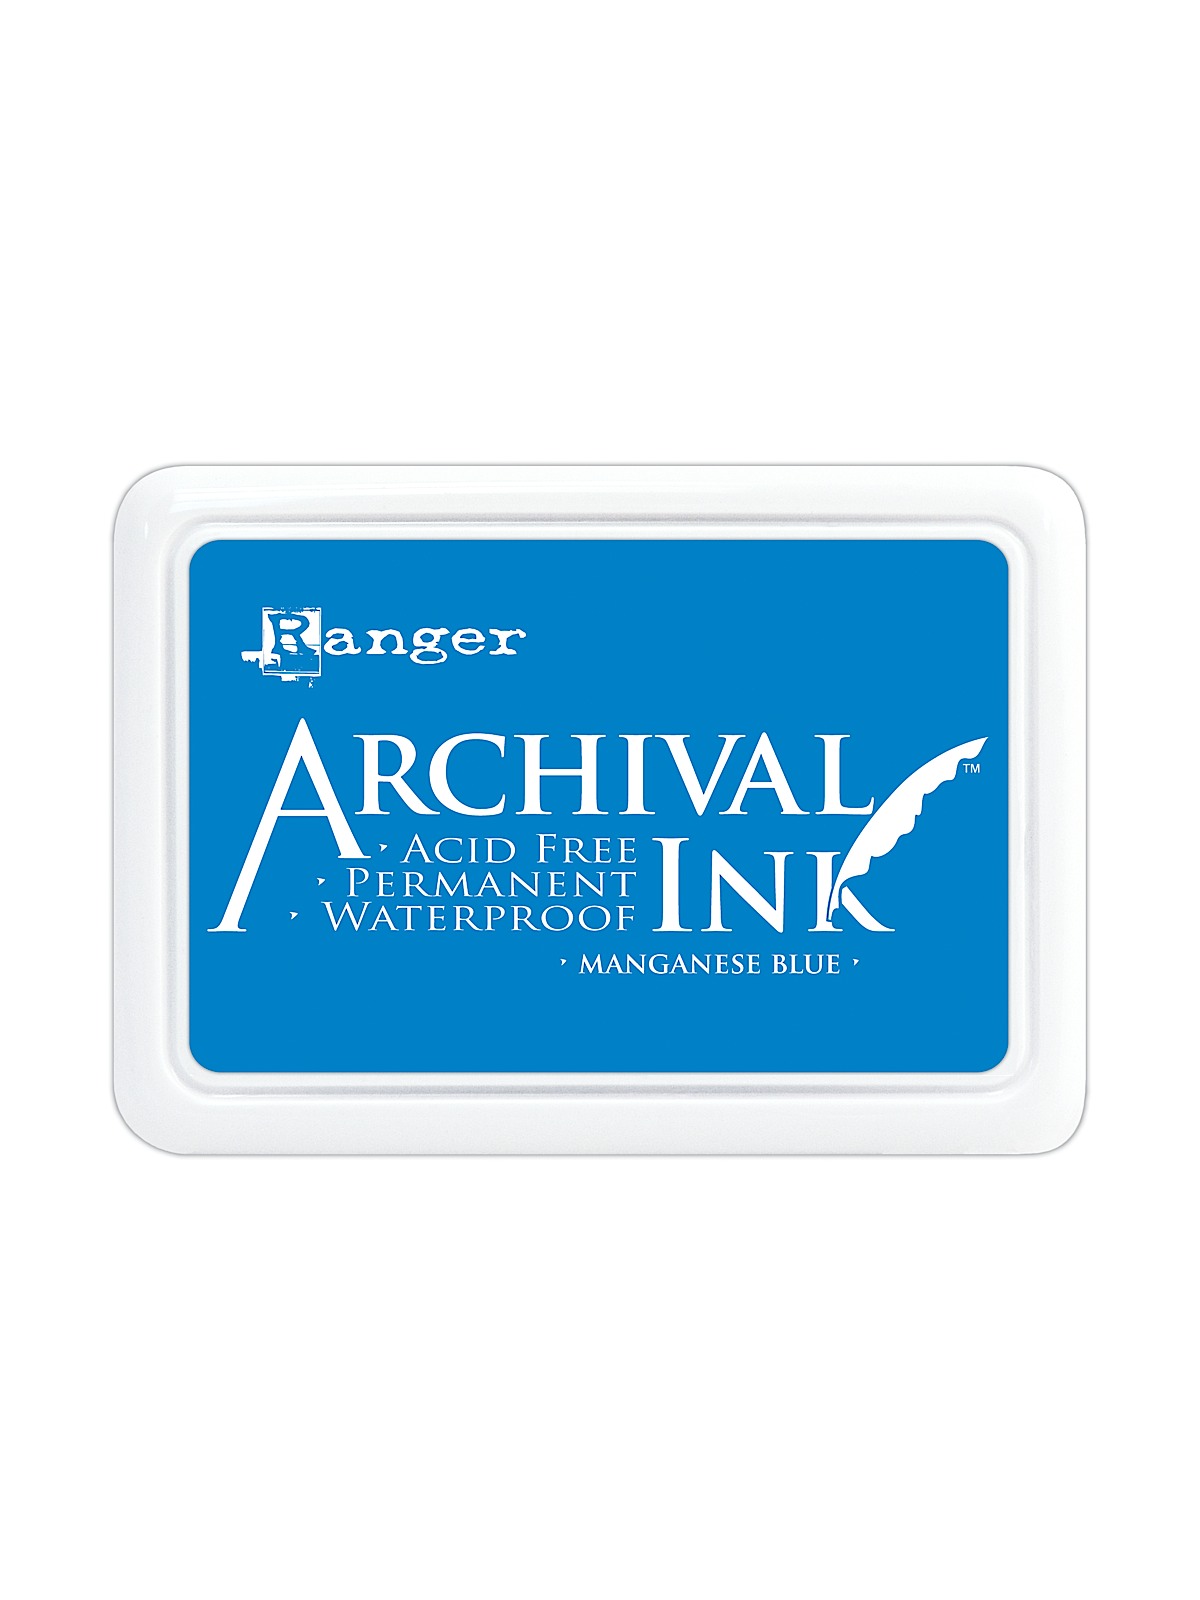 Archival Ink Manganese Blue 2 1 2 In. X 3 3 4 In. Pad